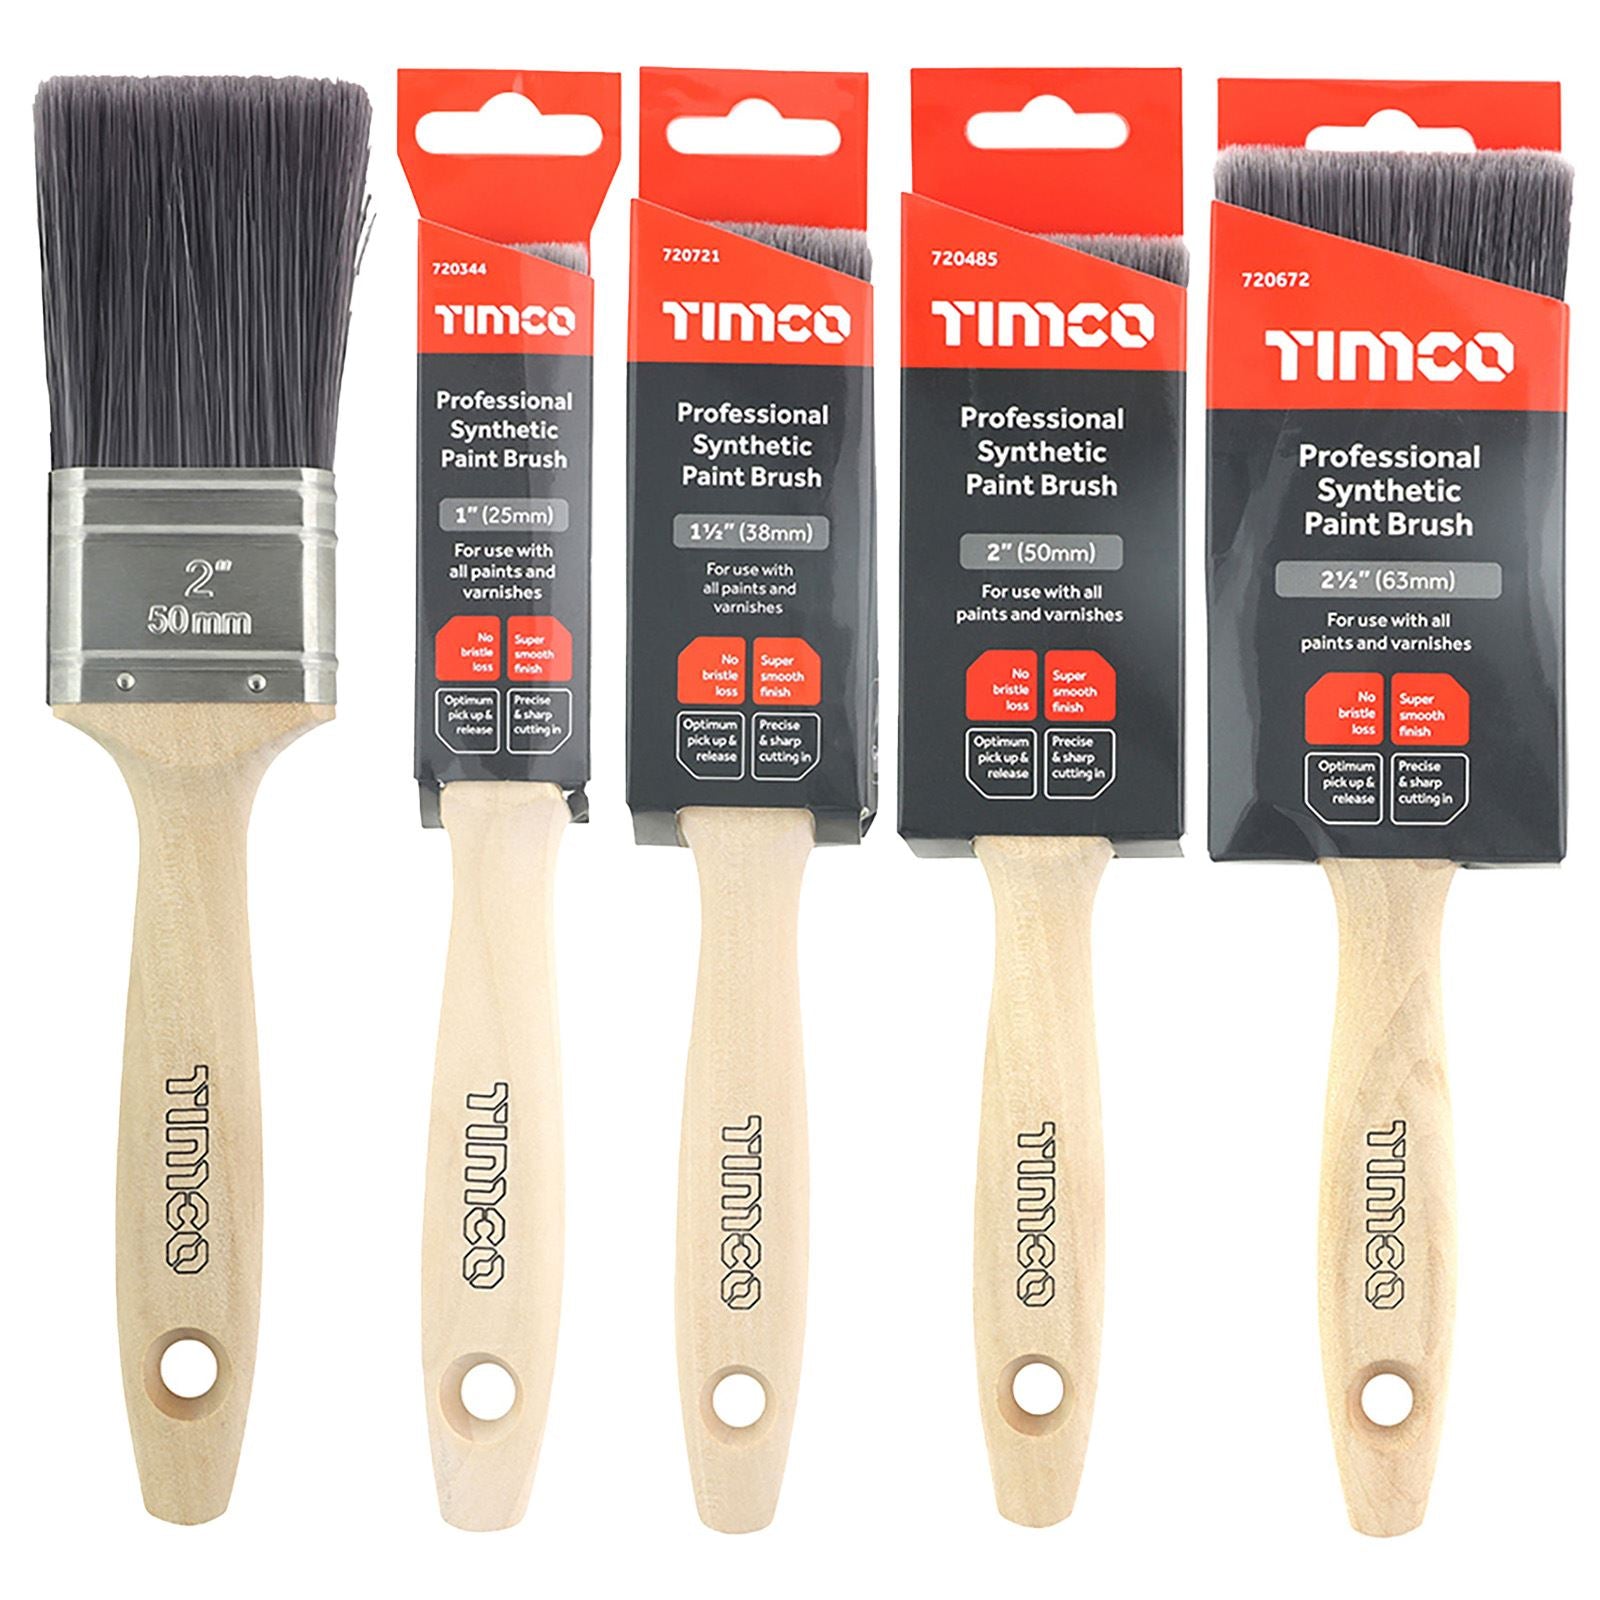 TIMCO Paint Brushes Professional Synthetic No Bristle Loss Brush 25-63mm - Choose Size